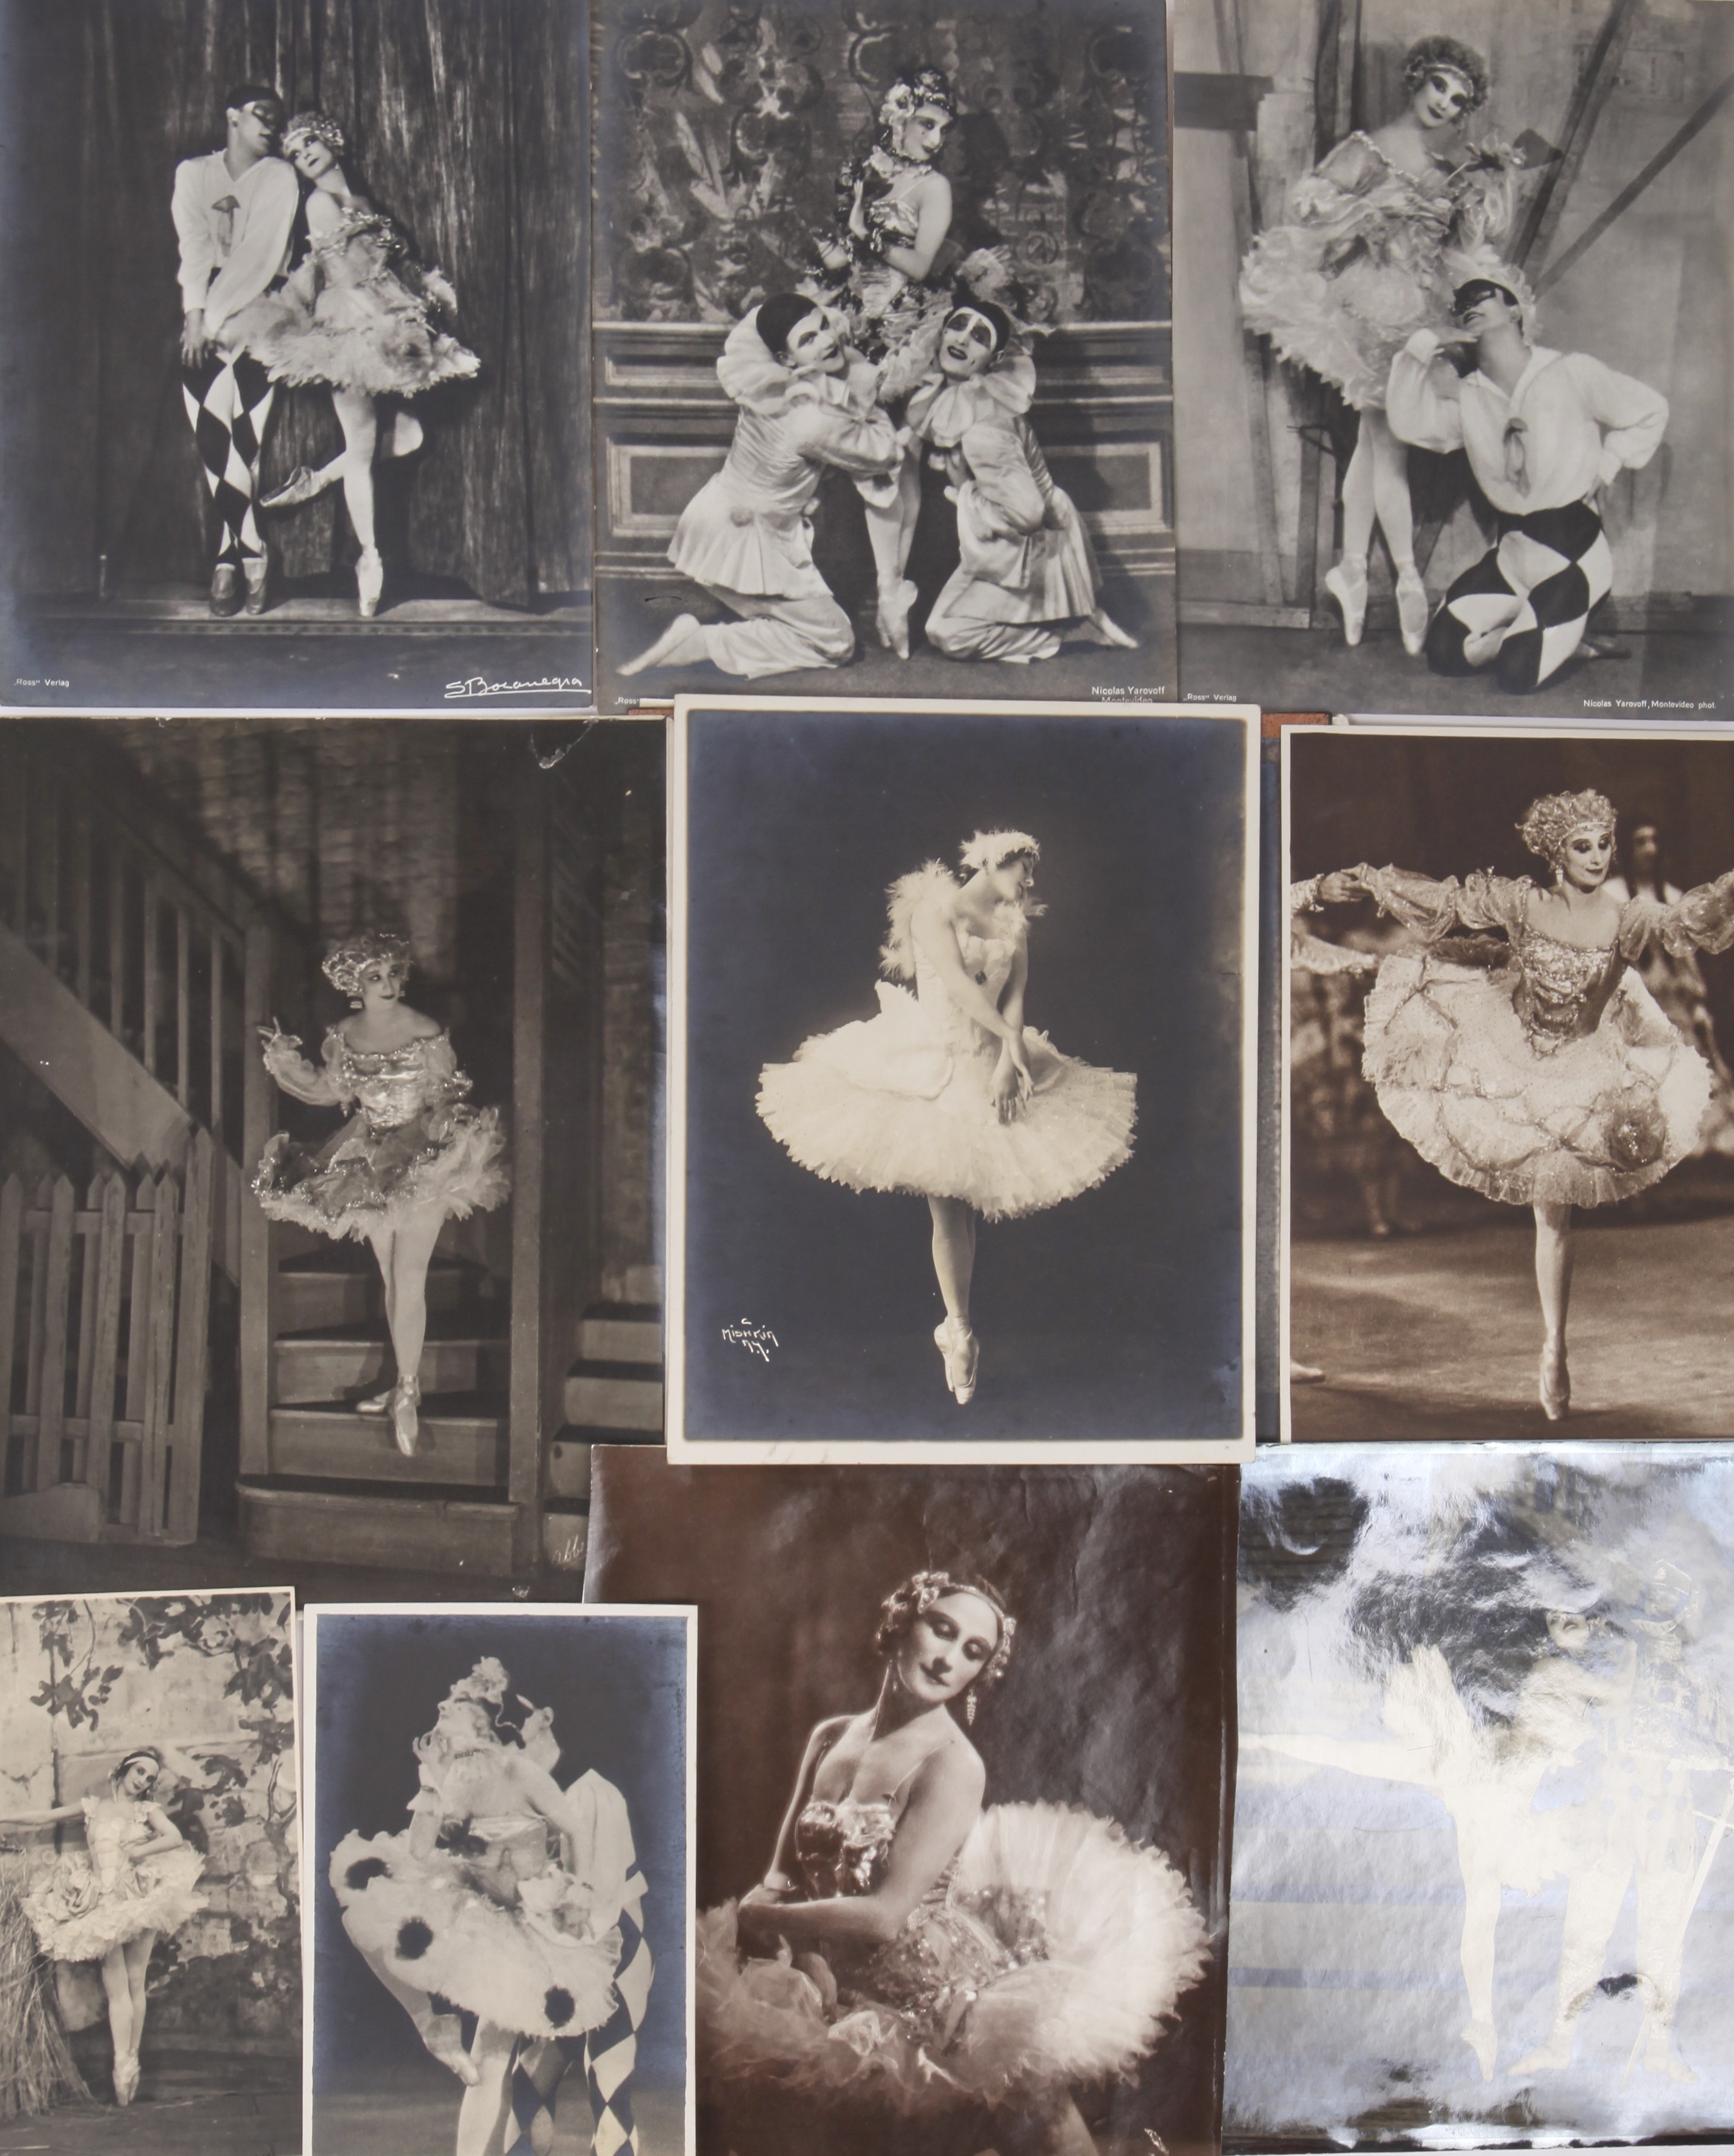 THE ROBERTA LAZZARINI COLLECTION OF PAVLOVA AND OTHER BALLET MATERIAL